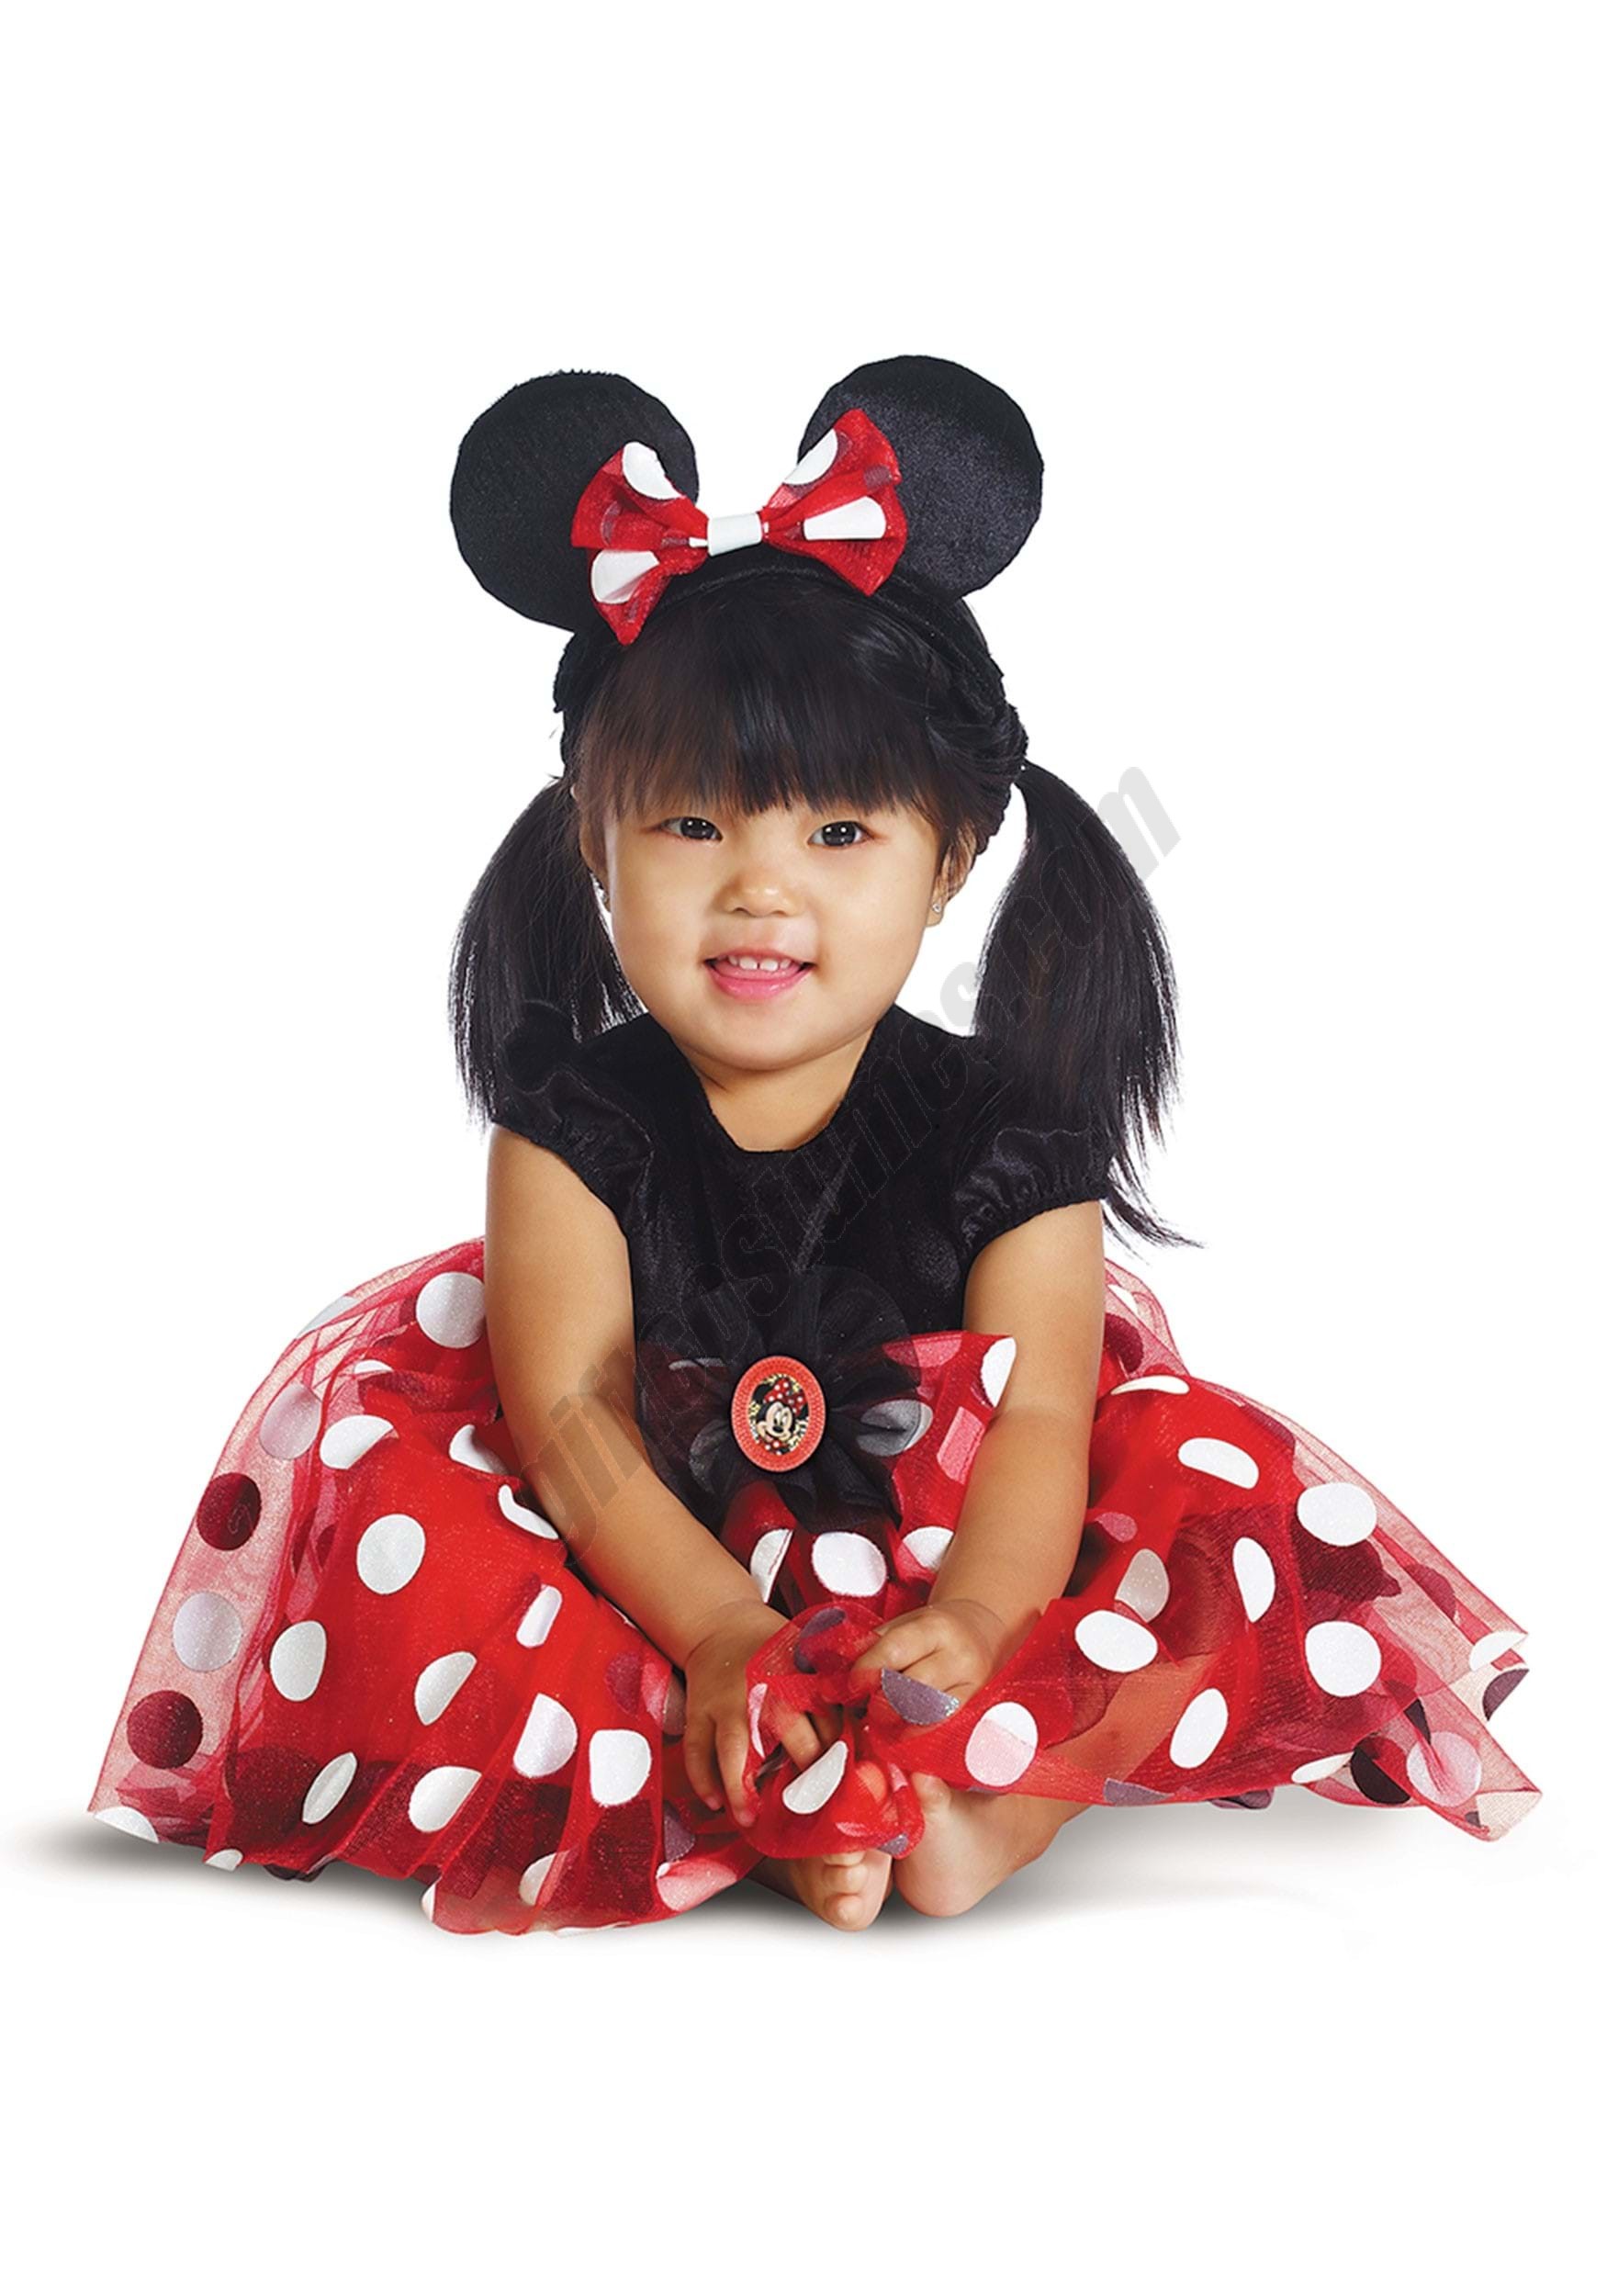 Red Minnie Mouse Deluxe Costume for Infants Promotions - Red Minnie Mouse Deluxe Costume for Infants Promotions